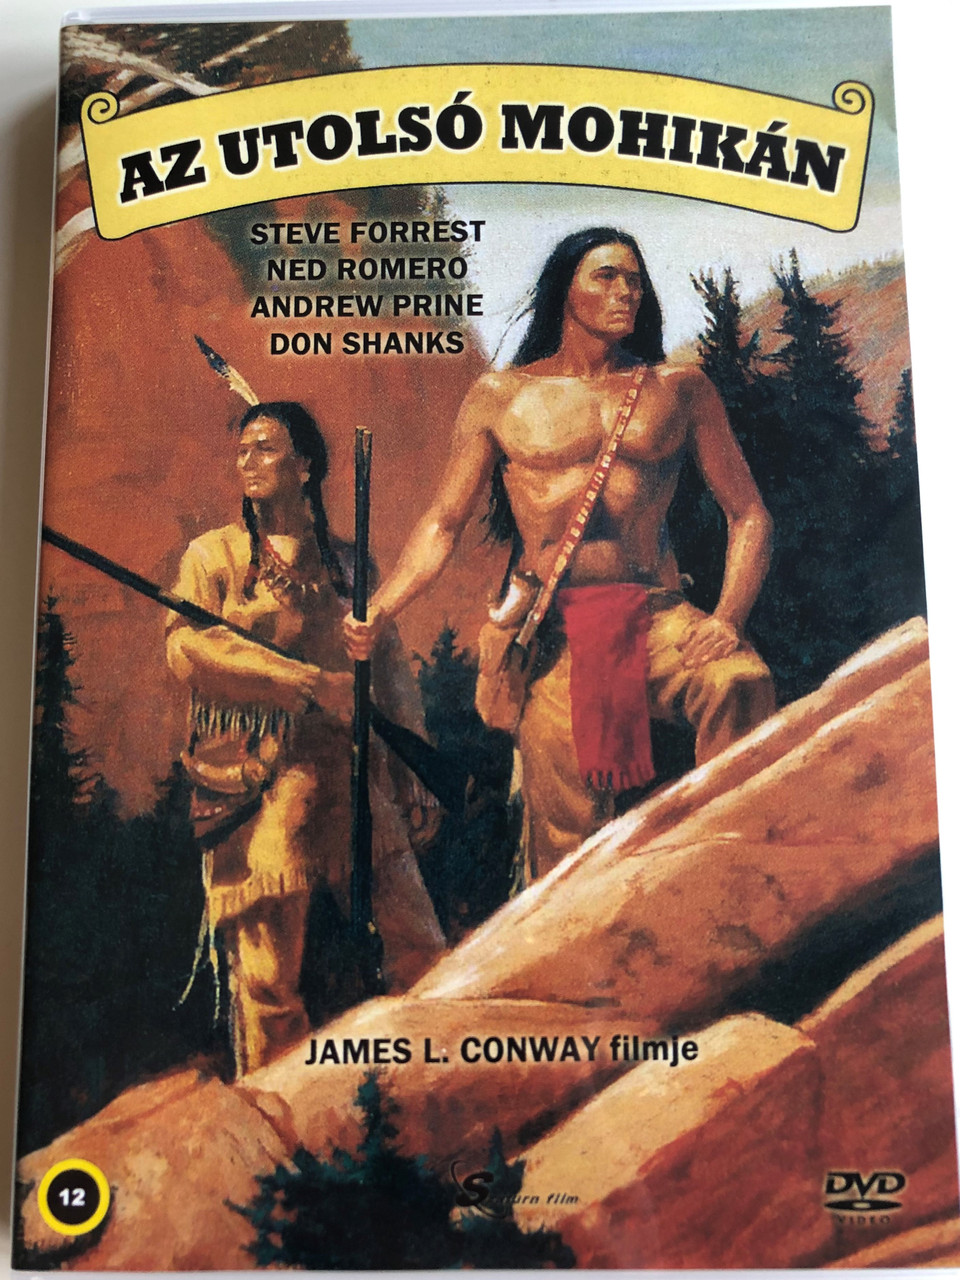 The Last of the Mohicans DVD 1977 Az utolsó mohikán / Directed by James L.  Conway / Starring: Steve Forrest, Ned Romero, Andrew Prine, Don Shanks -  bibleinmylanguage